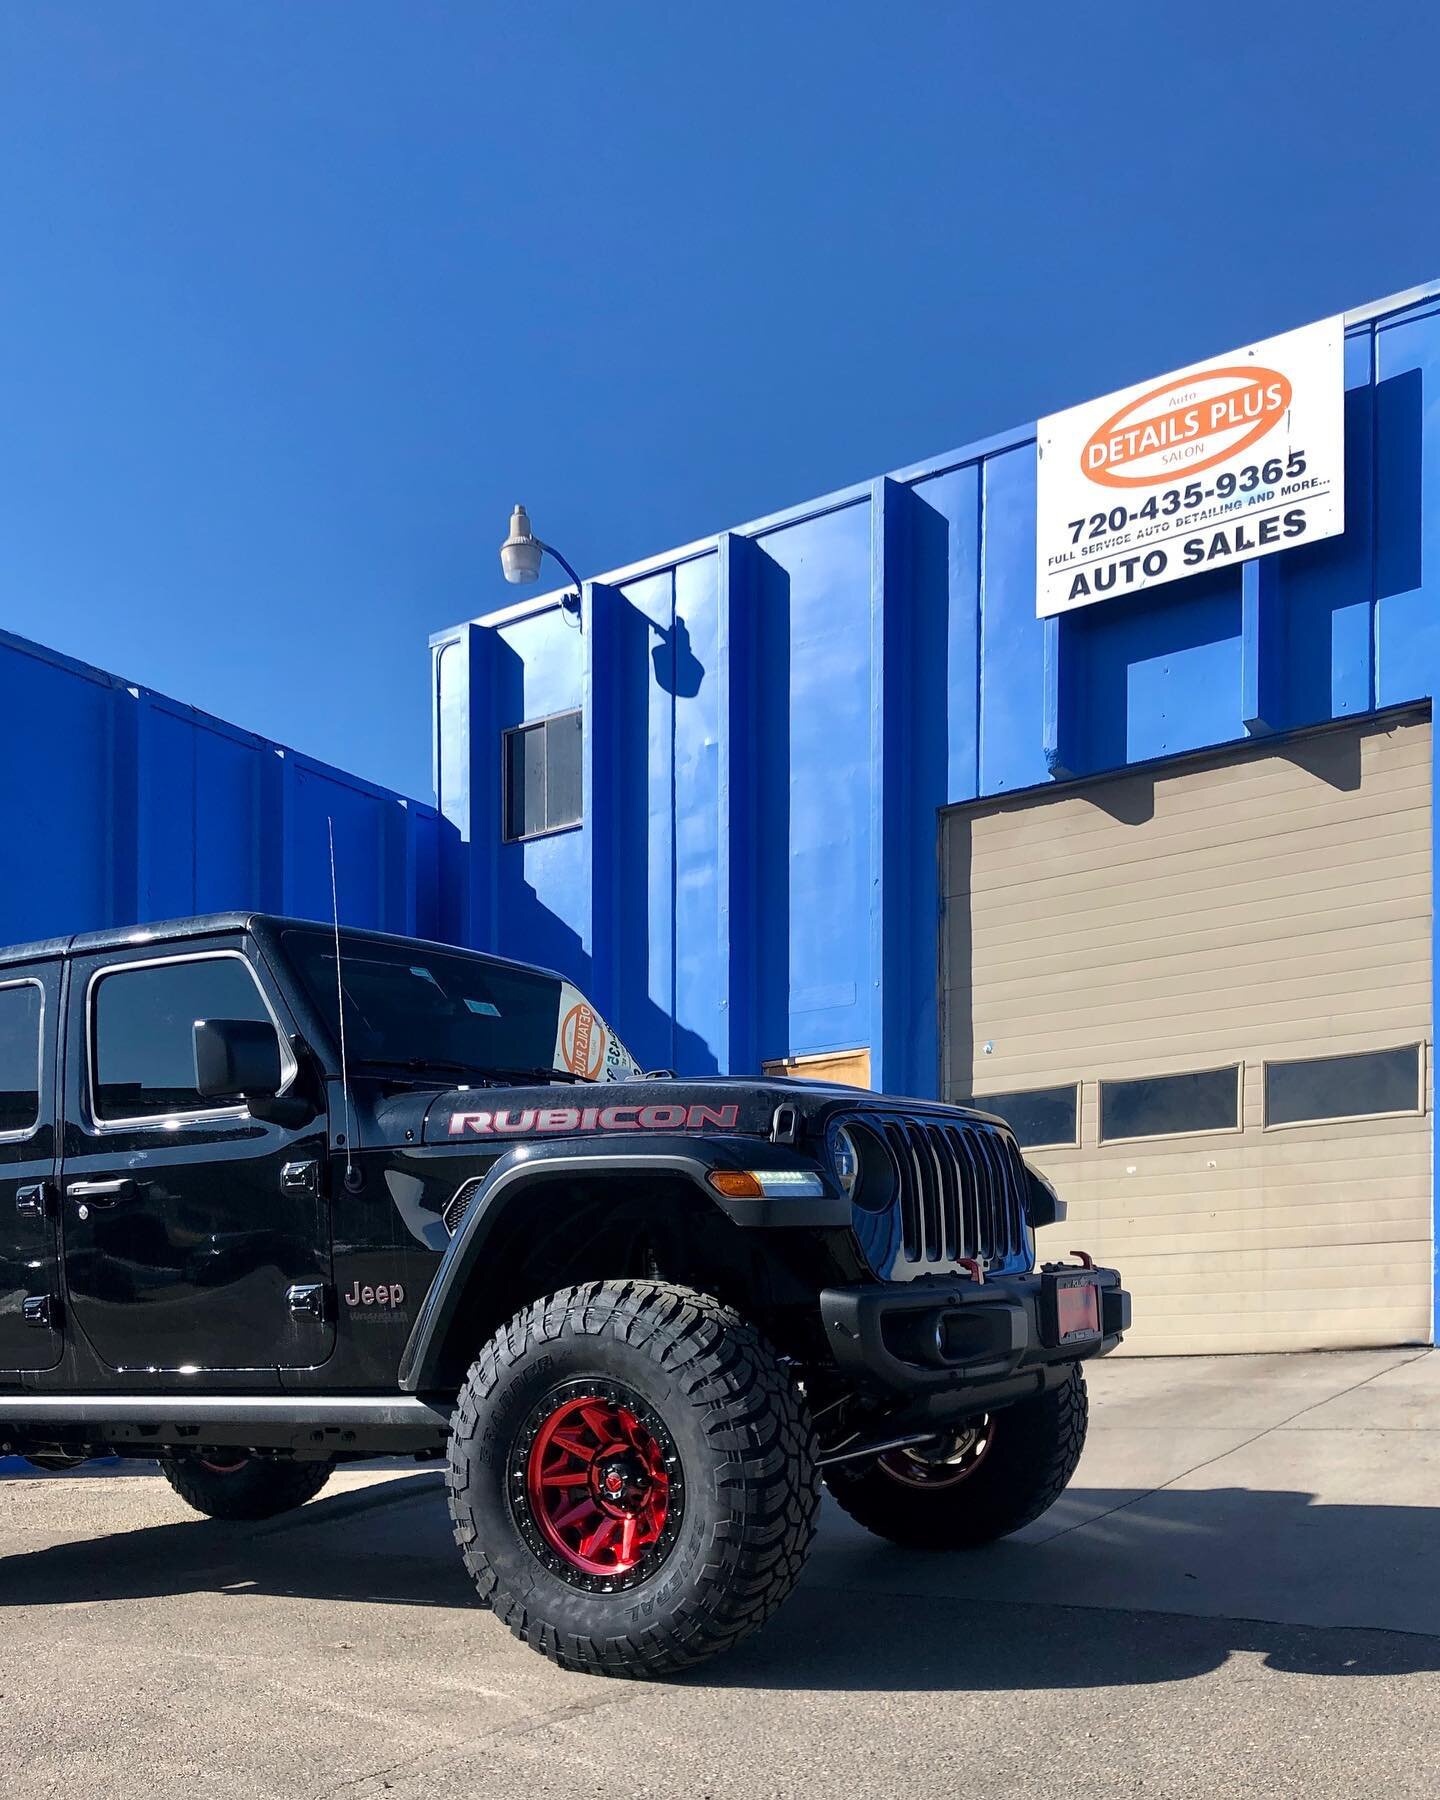 Starting the day off right with two fronts to match on this brand new 2020 Jeep Wrangler! #Boulder #Tinting #2Fronts #Matching #DetailsPlusAutoSalon #Details #ClearChoice #Pollard #Bouldering